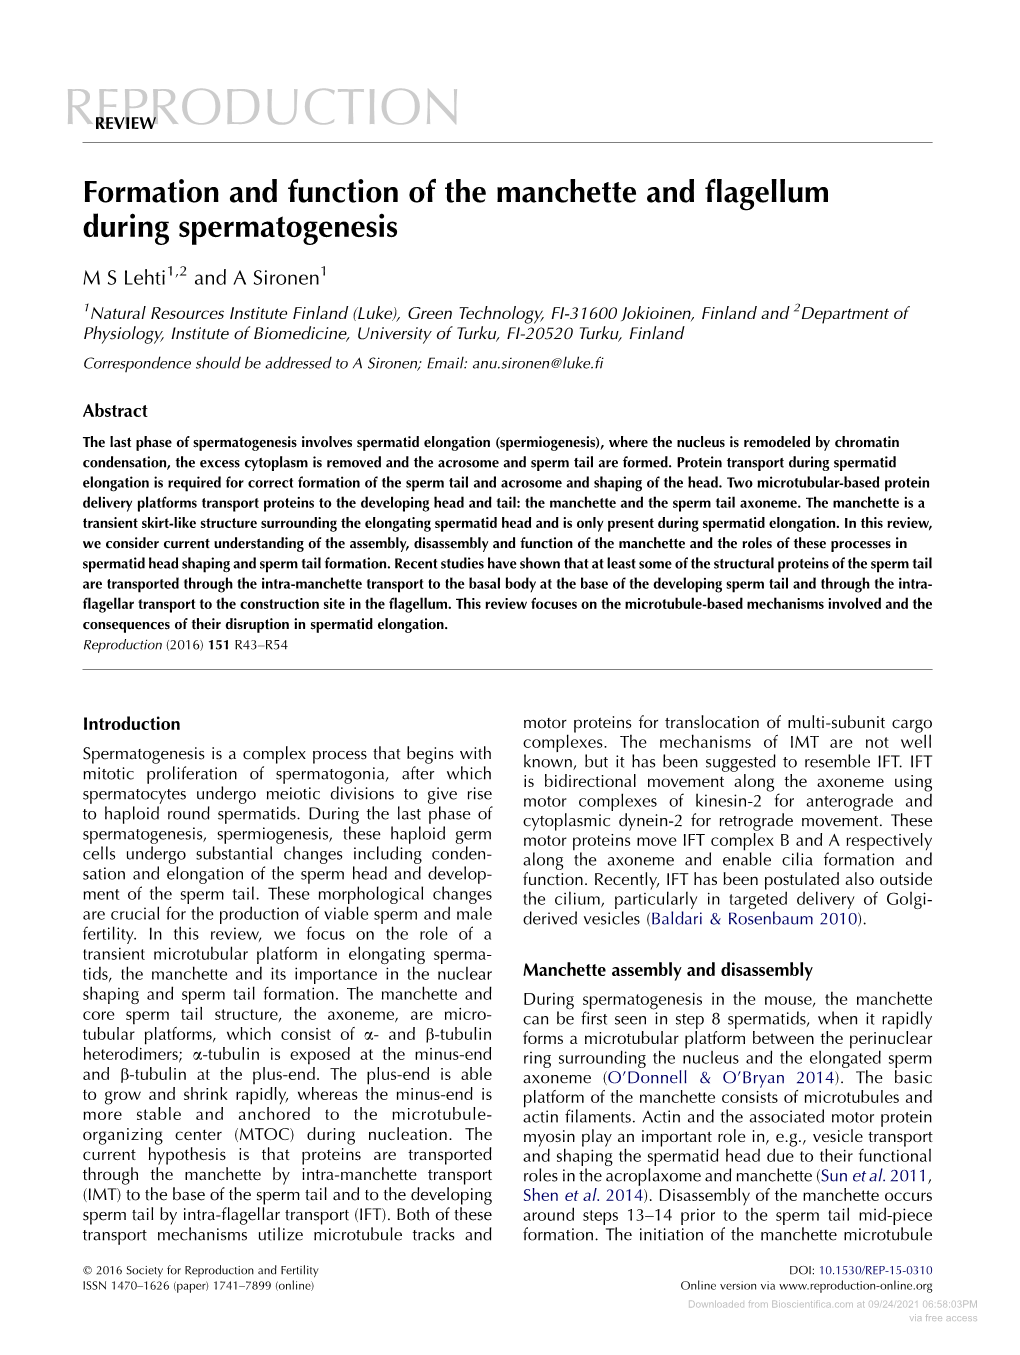 Formation and Function of the Manchette and Flagellum During